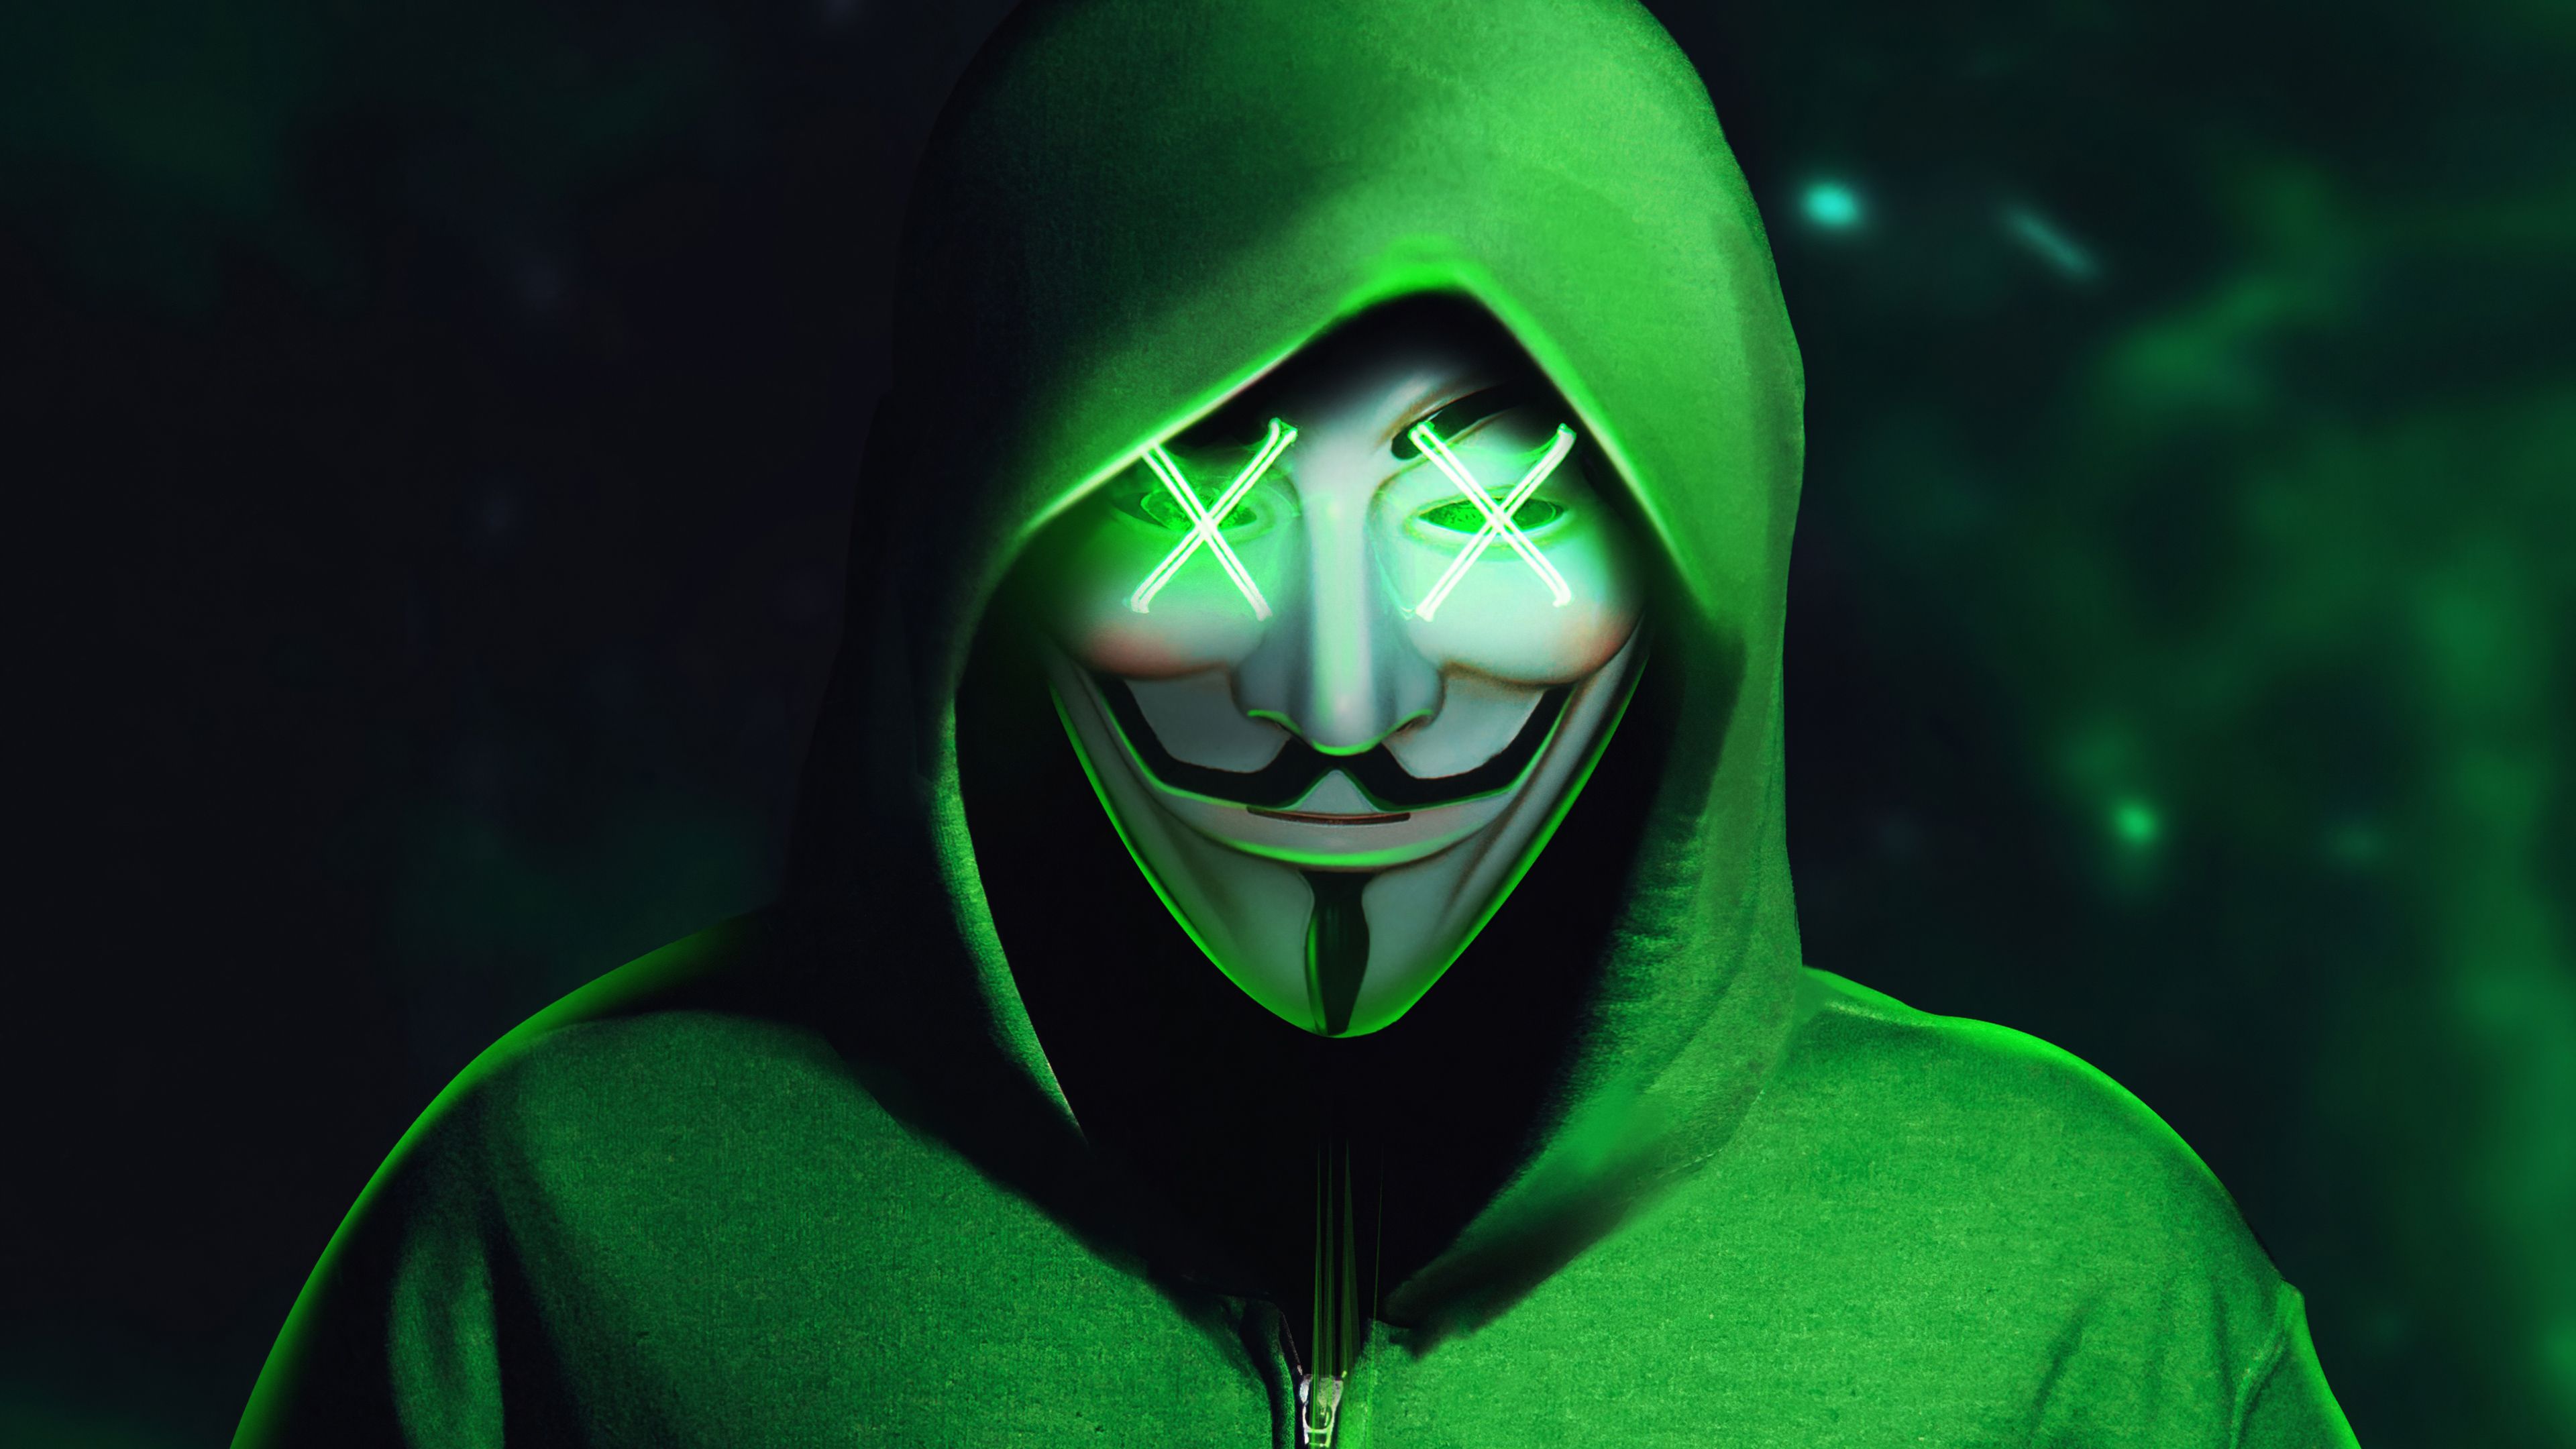 Green Hoodie Anonymus Mask 4k, HD Artist, 4k Wallpaper, Image, Background, Photo and Picture